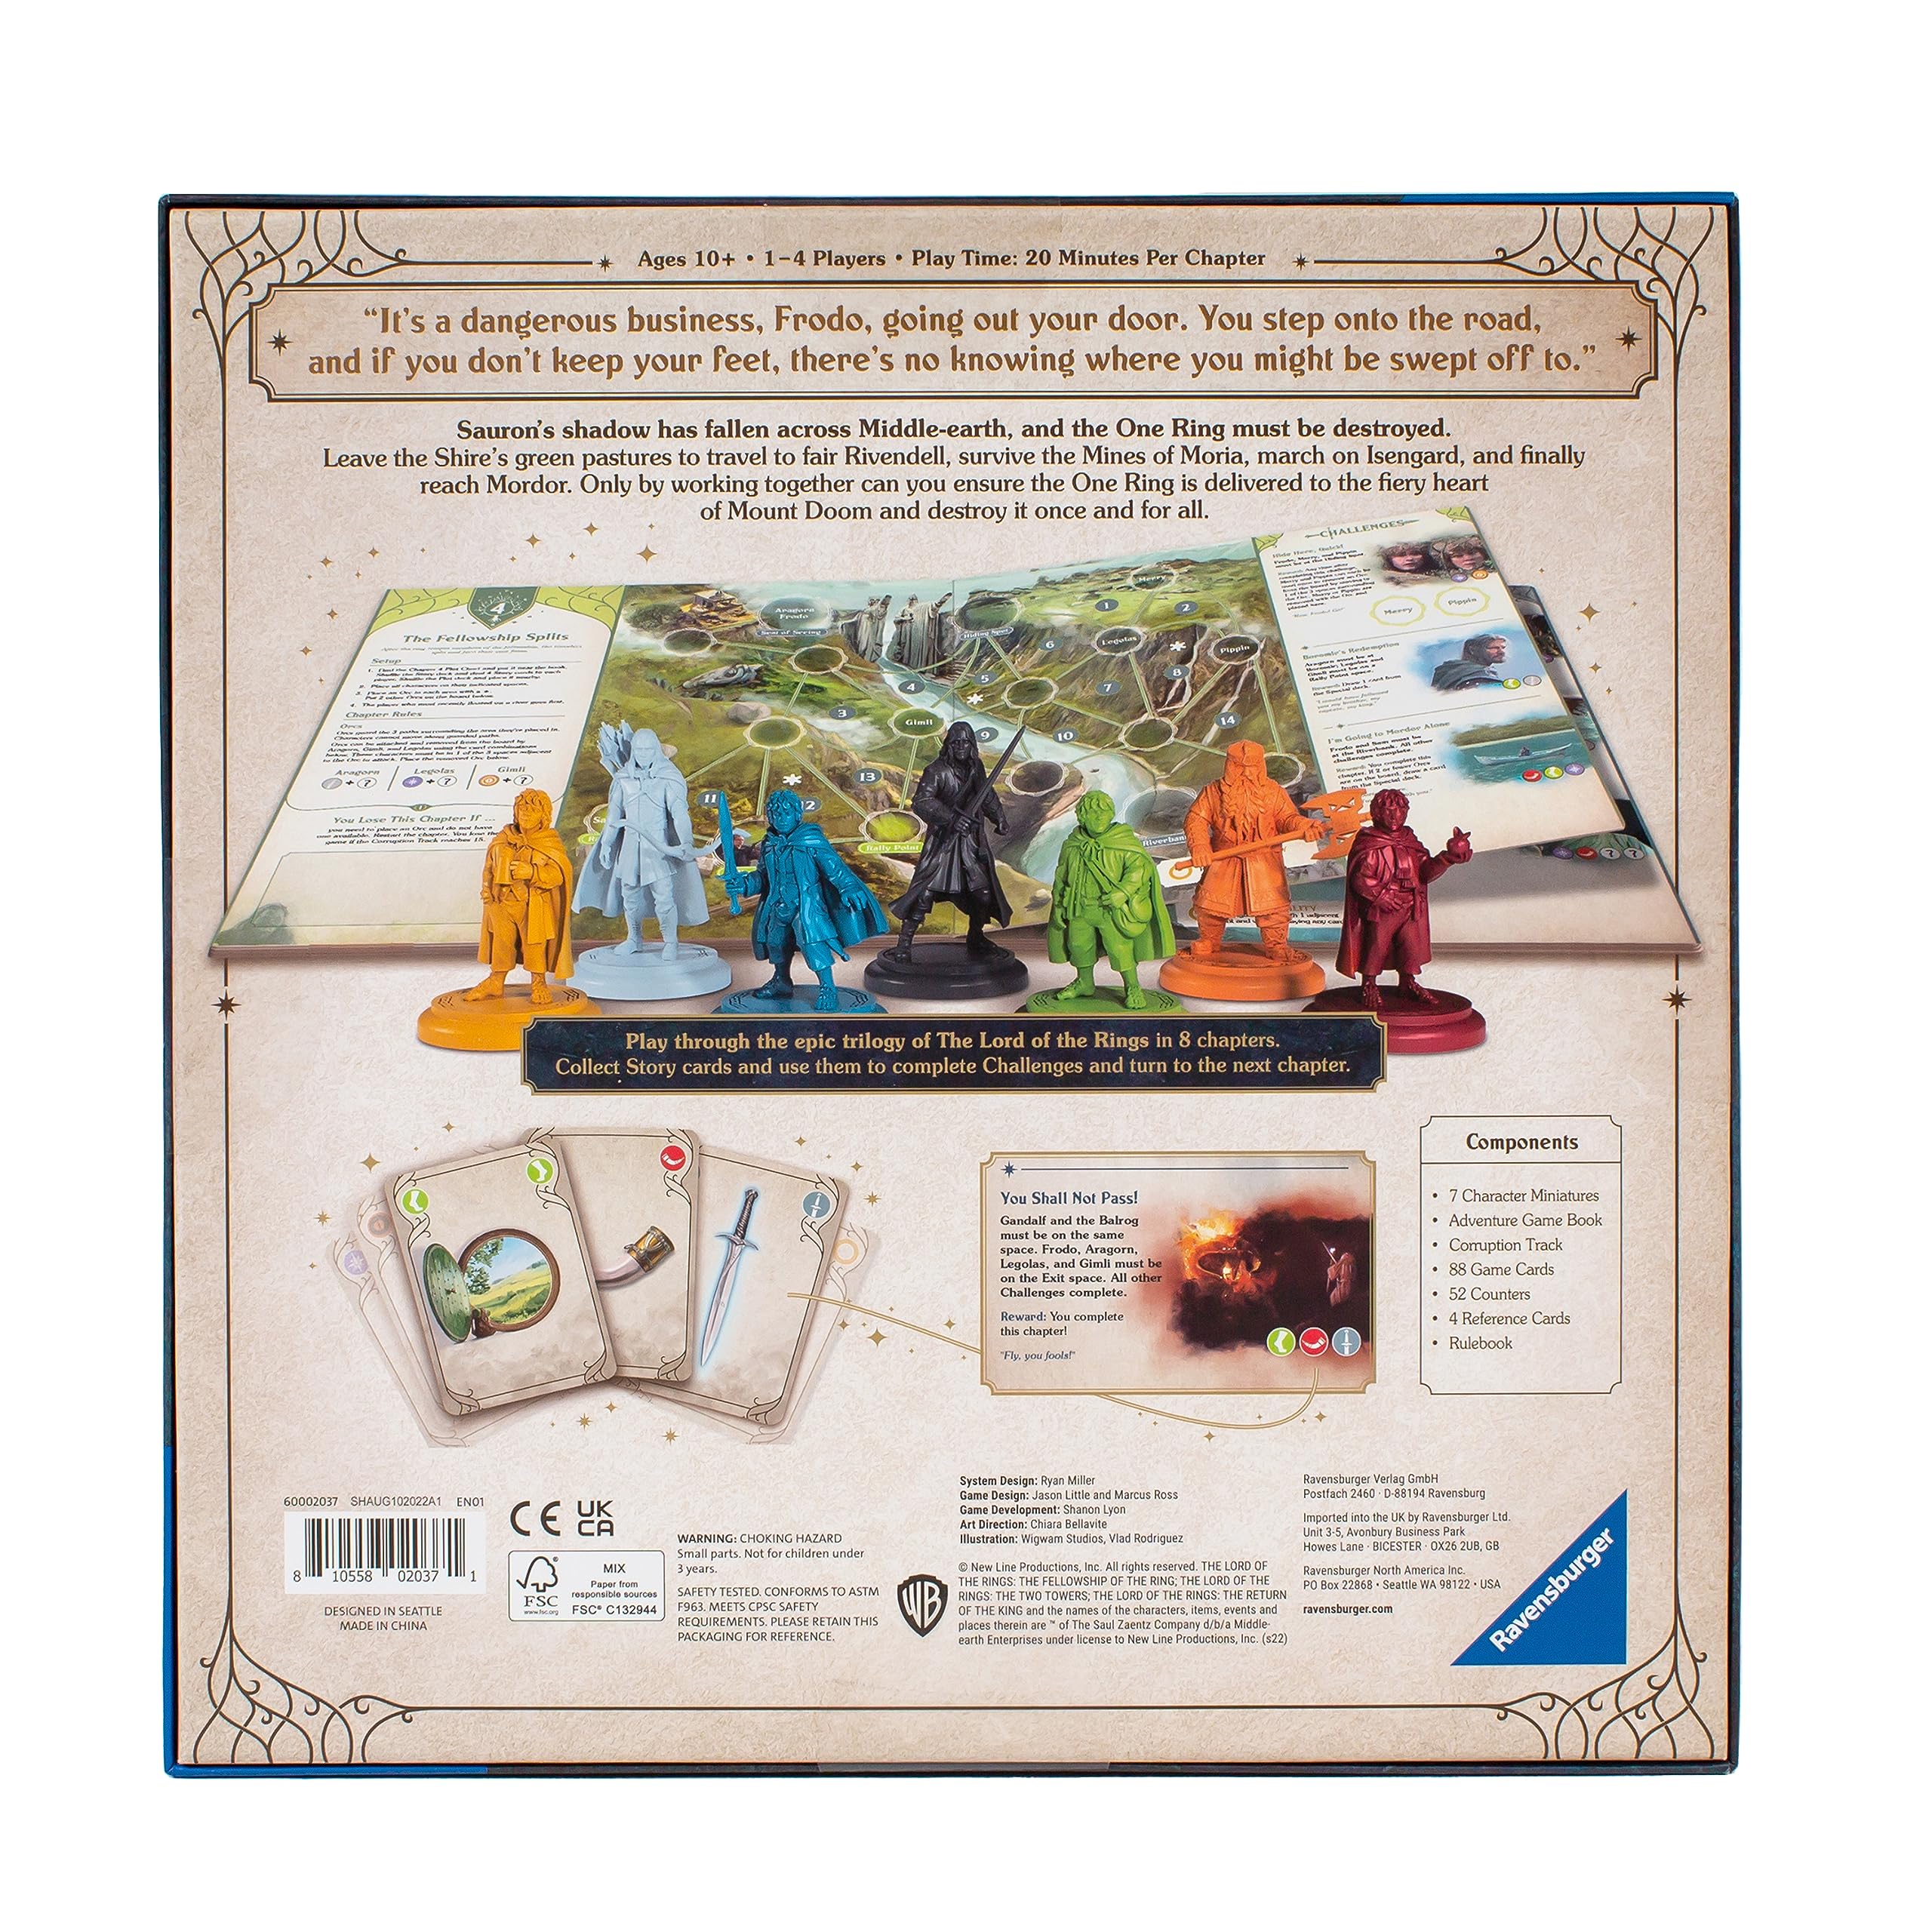 The Lord of The Rings Adventure Book Game for Ages 10 and Up - Work Together to Play Through The Movies